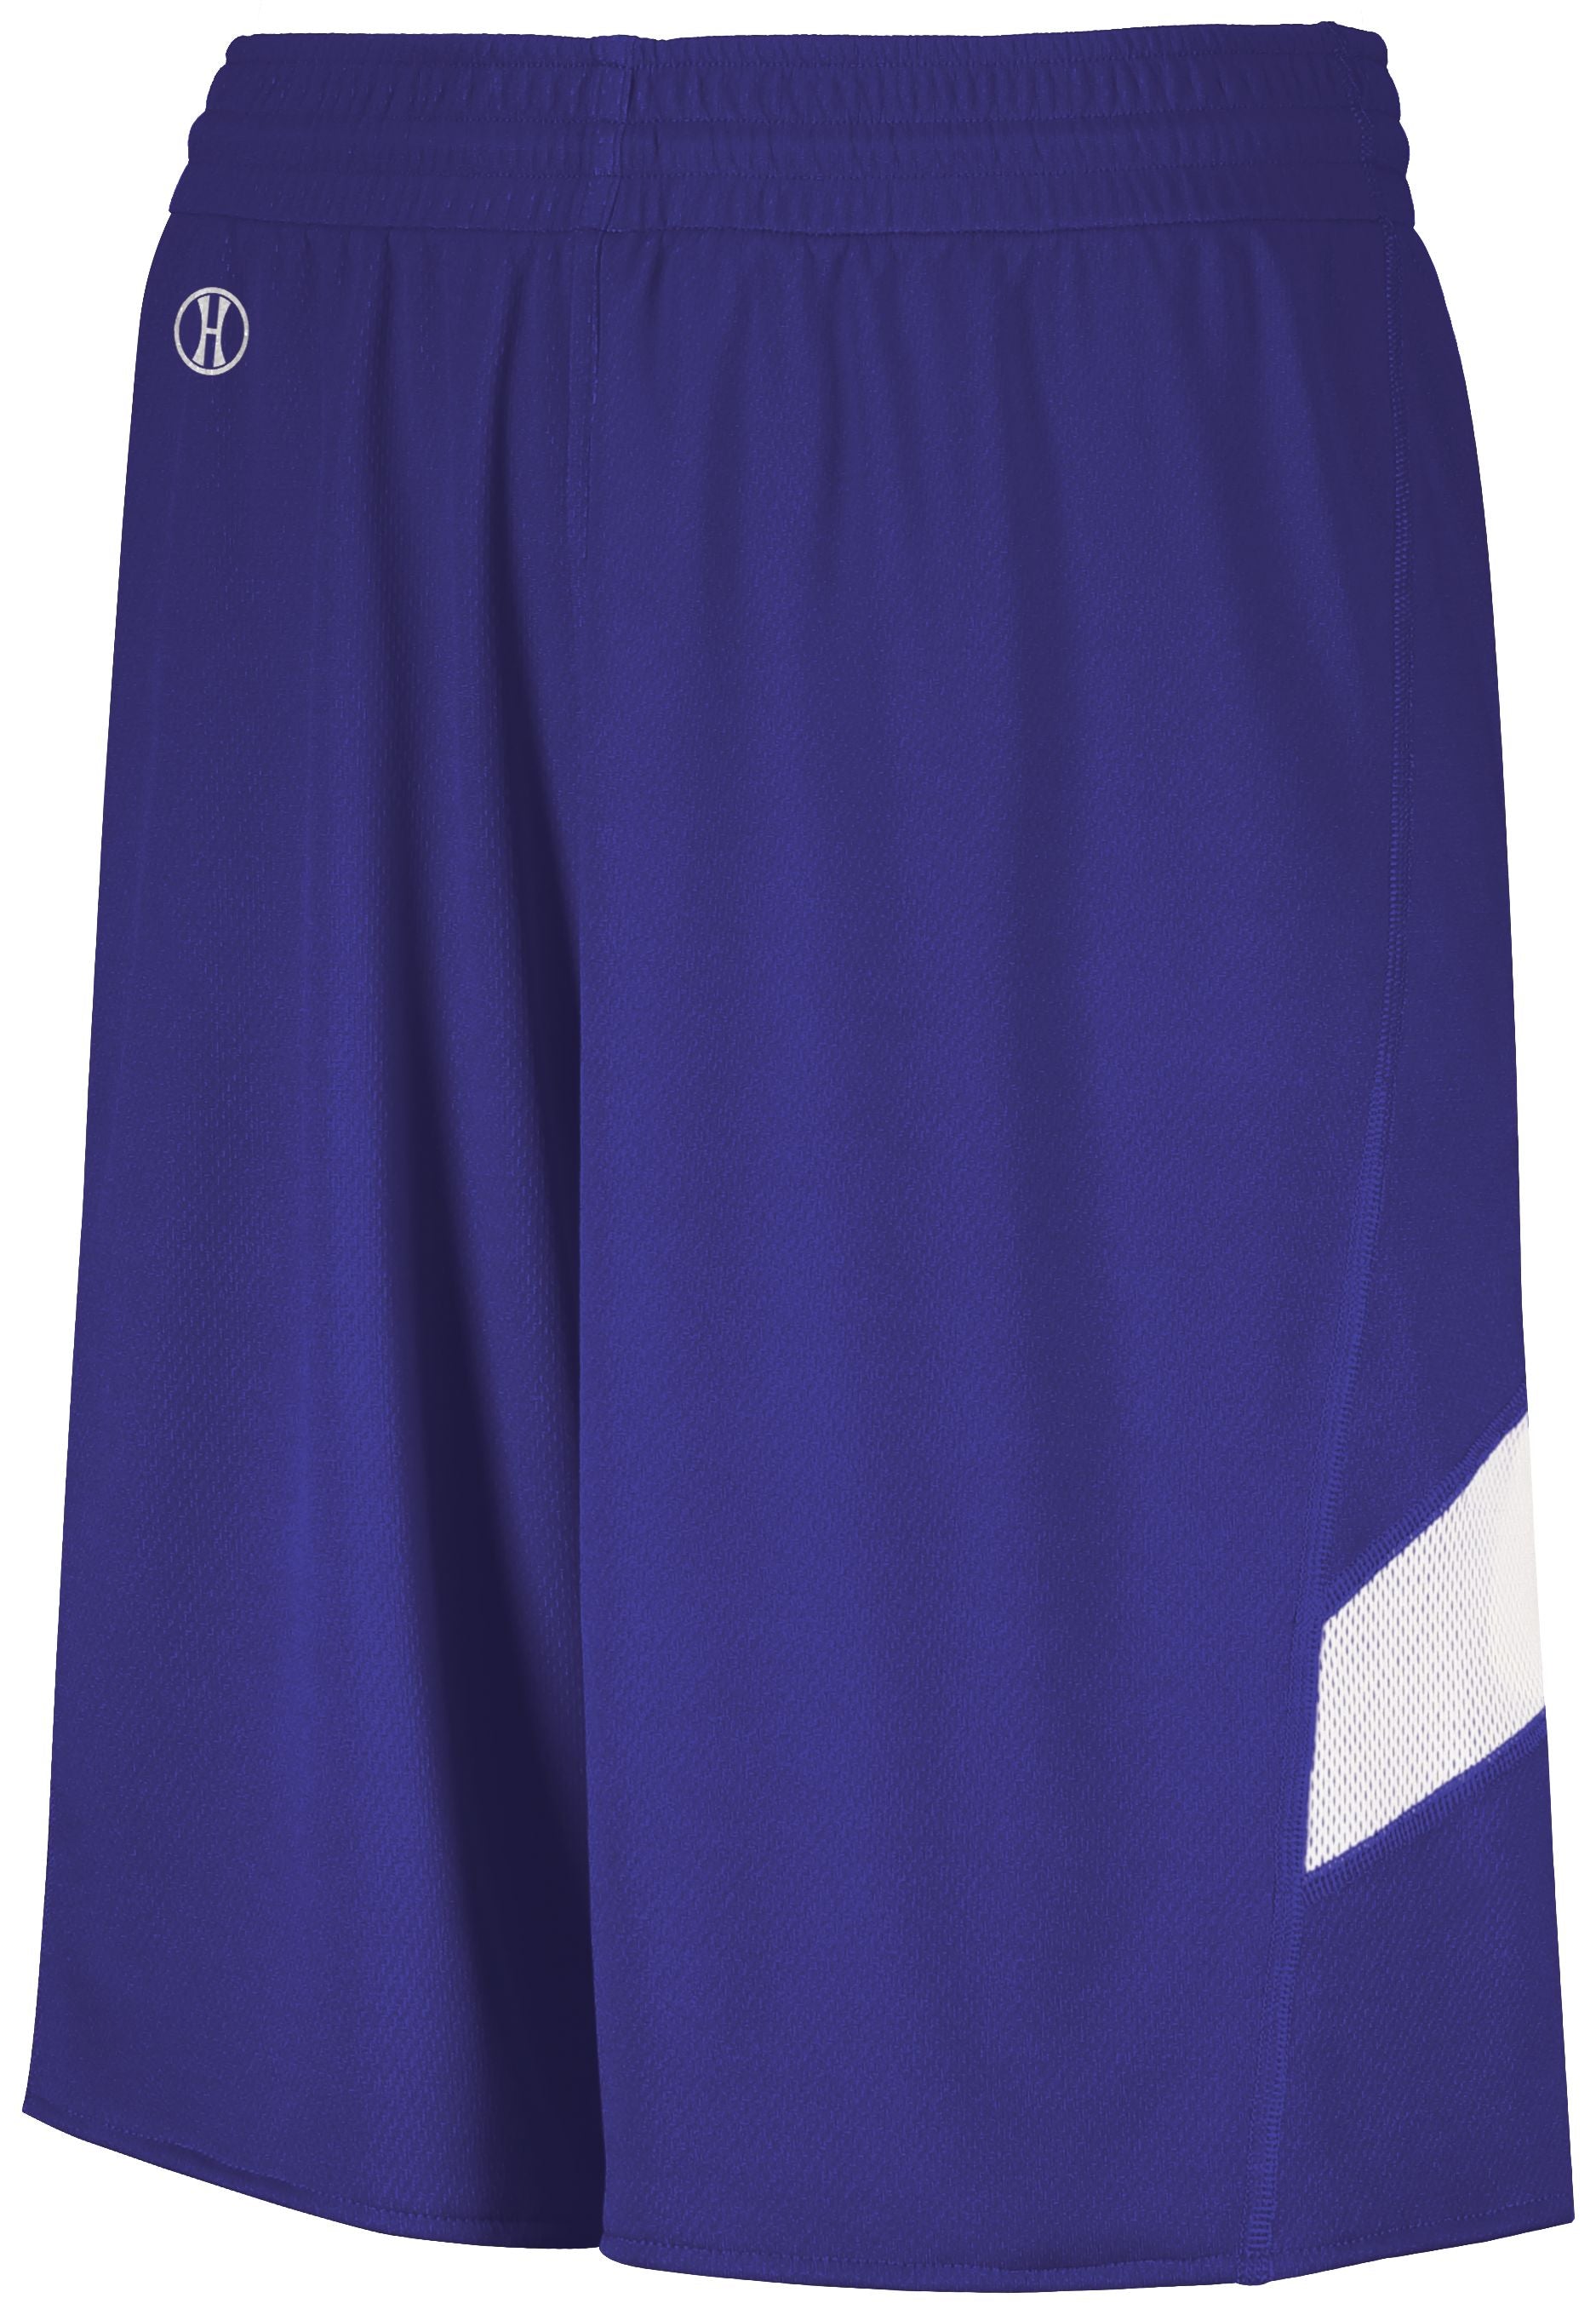 Holloway Dual-Side Single Ply Shorts in Purple/White  -Part of the Adult, Adult-Shorts, Basketball, Holloway, All-Sports, All-Sports-1 product lines at KanaleyCreations.com